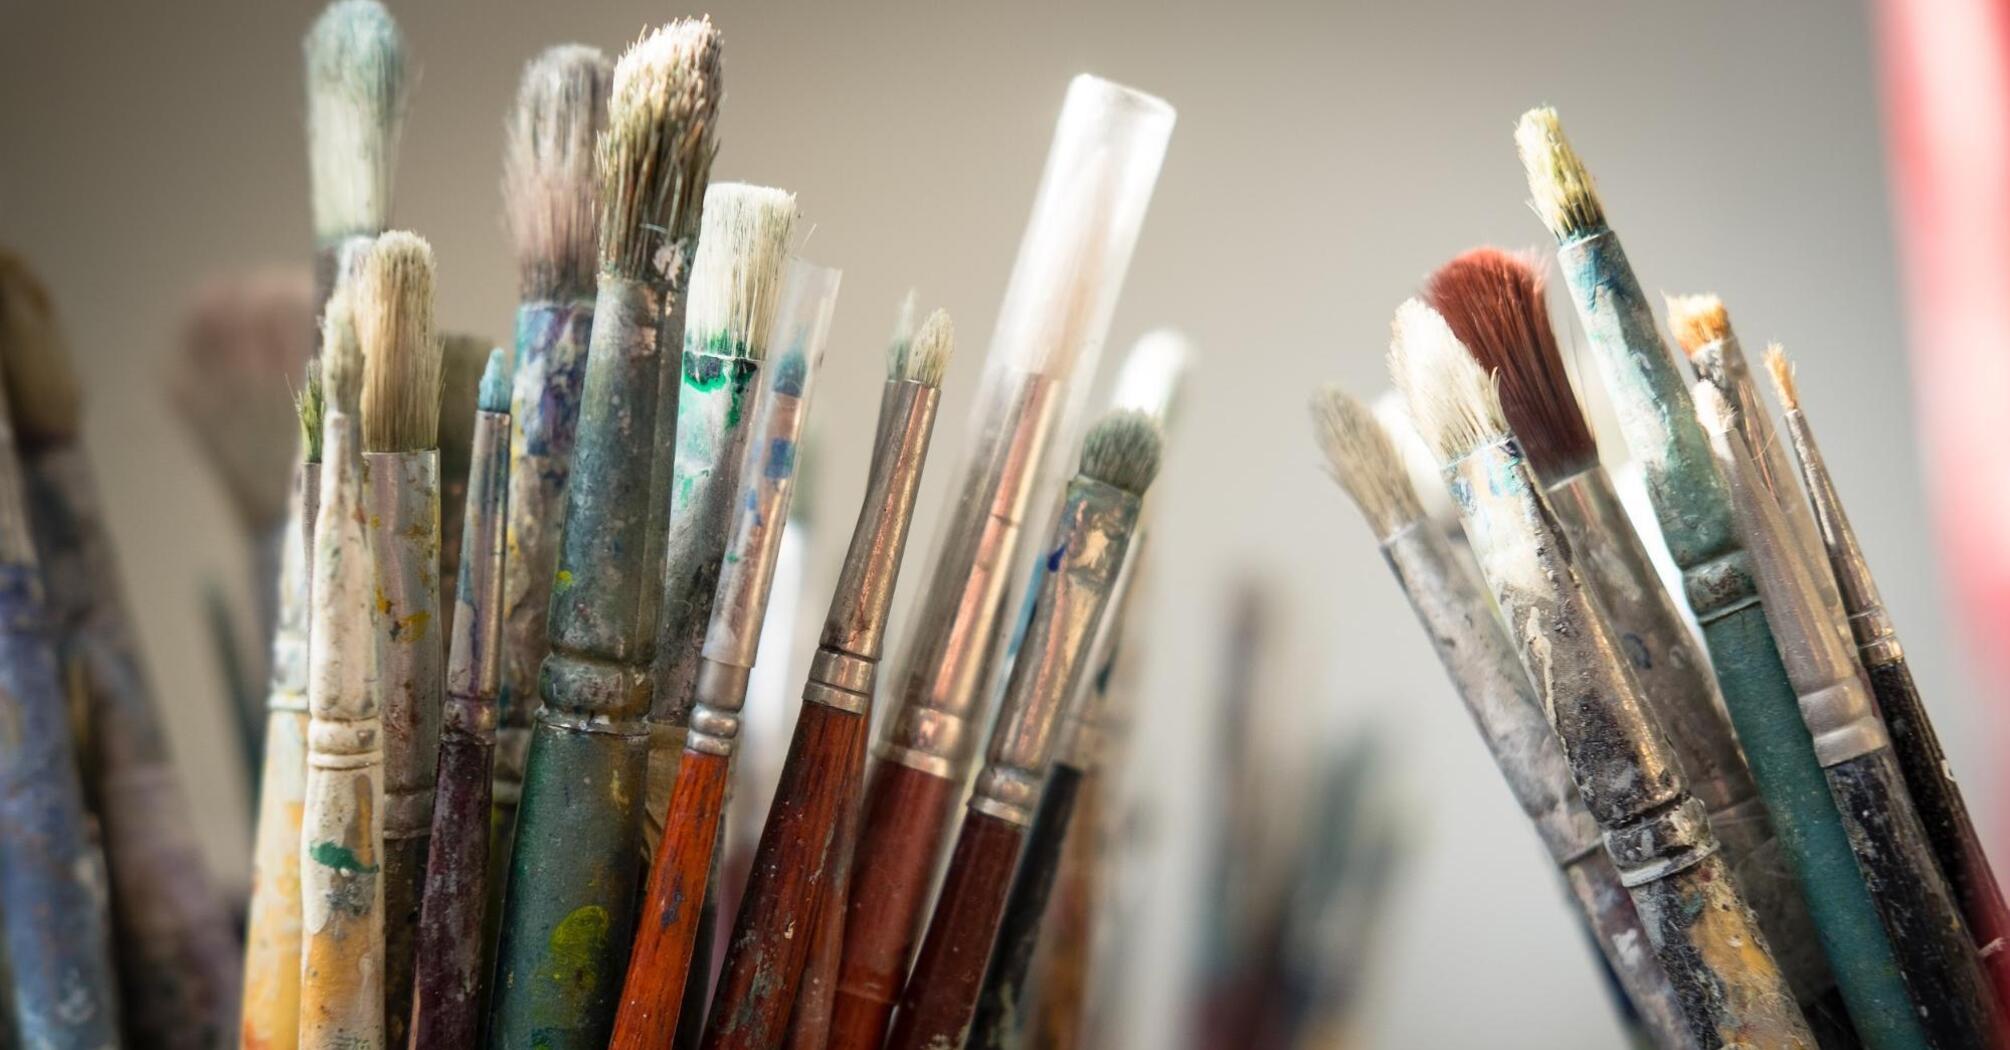 Brushes stained with paint